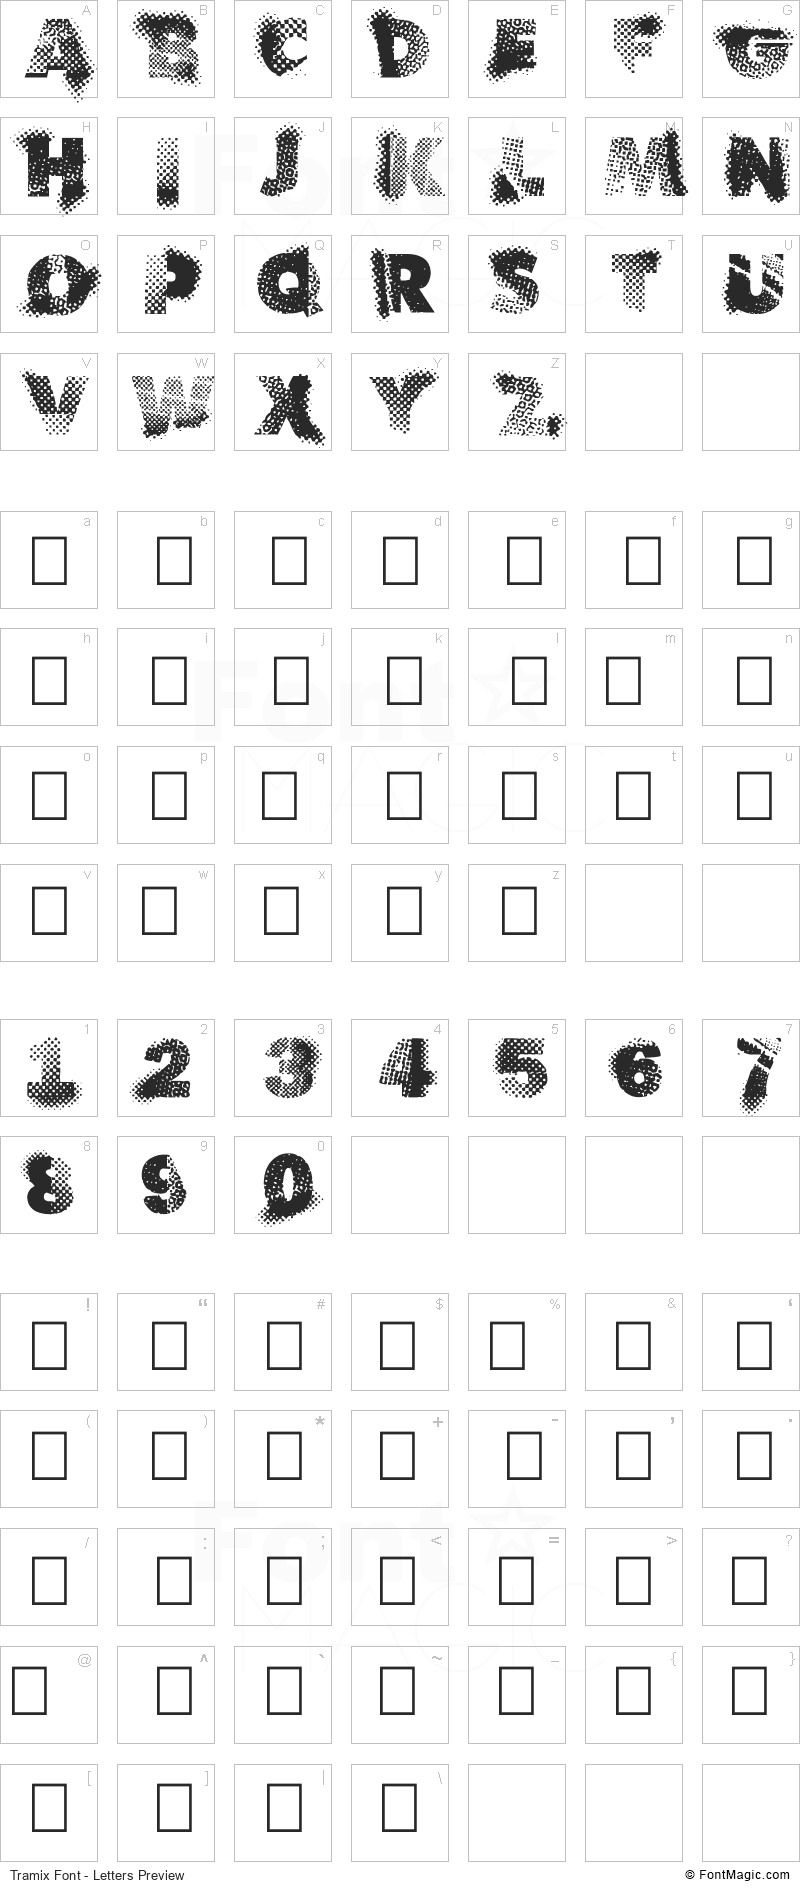 Tramix Font - All Latters Preview Chart